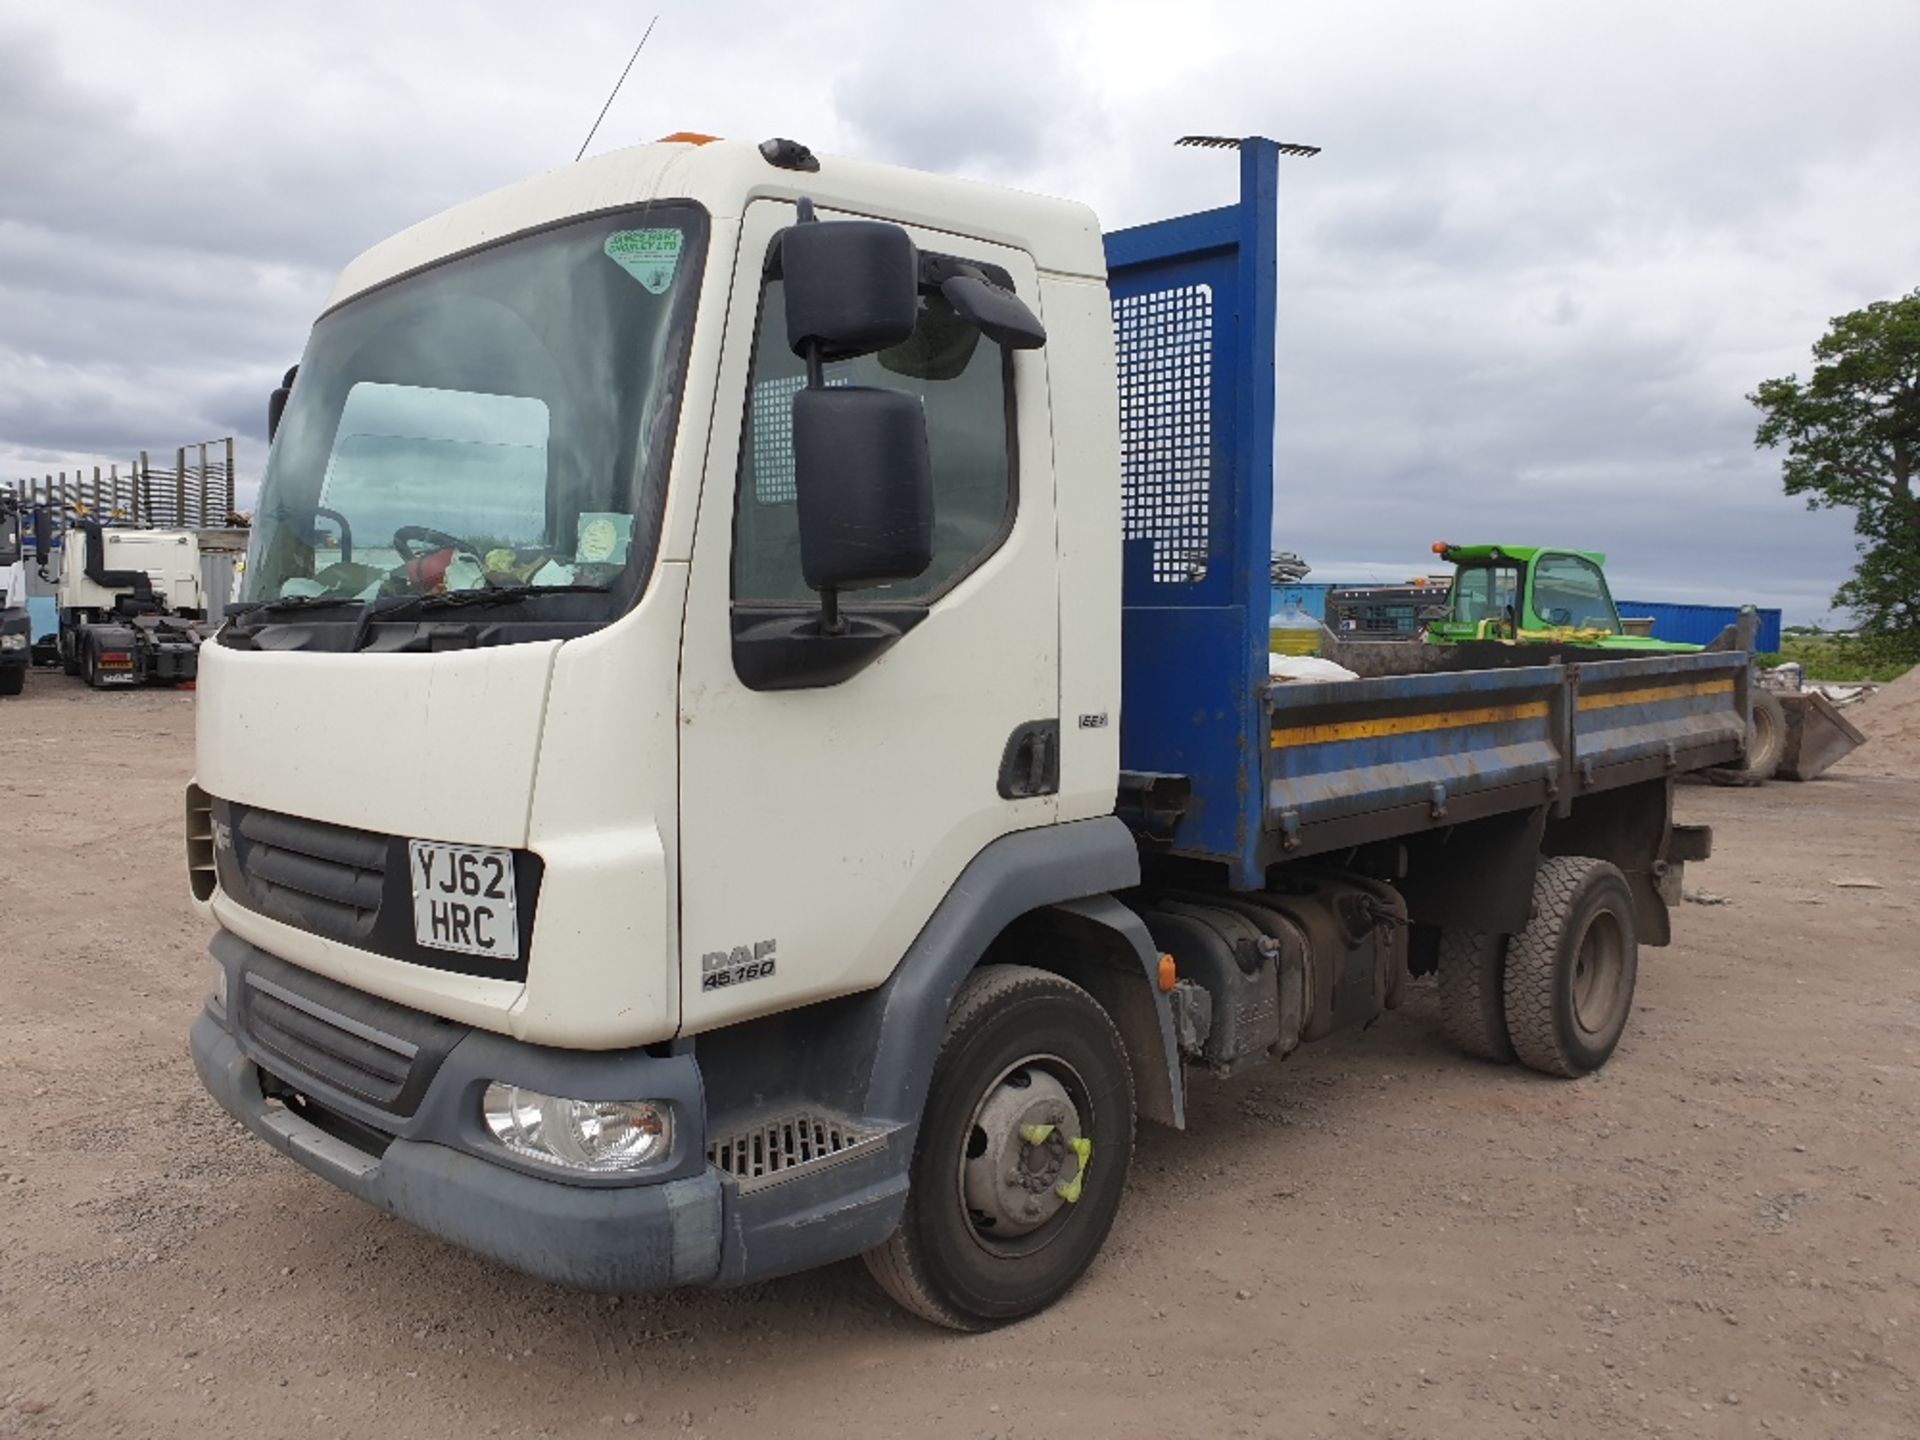 DAF LF FA 45.160 Ti with Paccar tipper body and reversing camera YJ62 HRC - Image 3 of 10